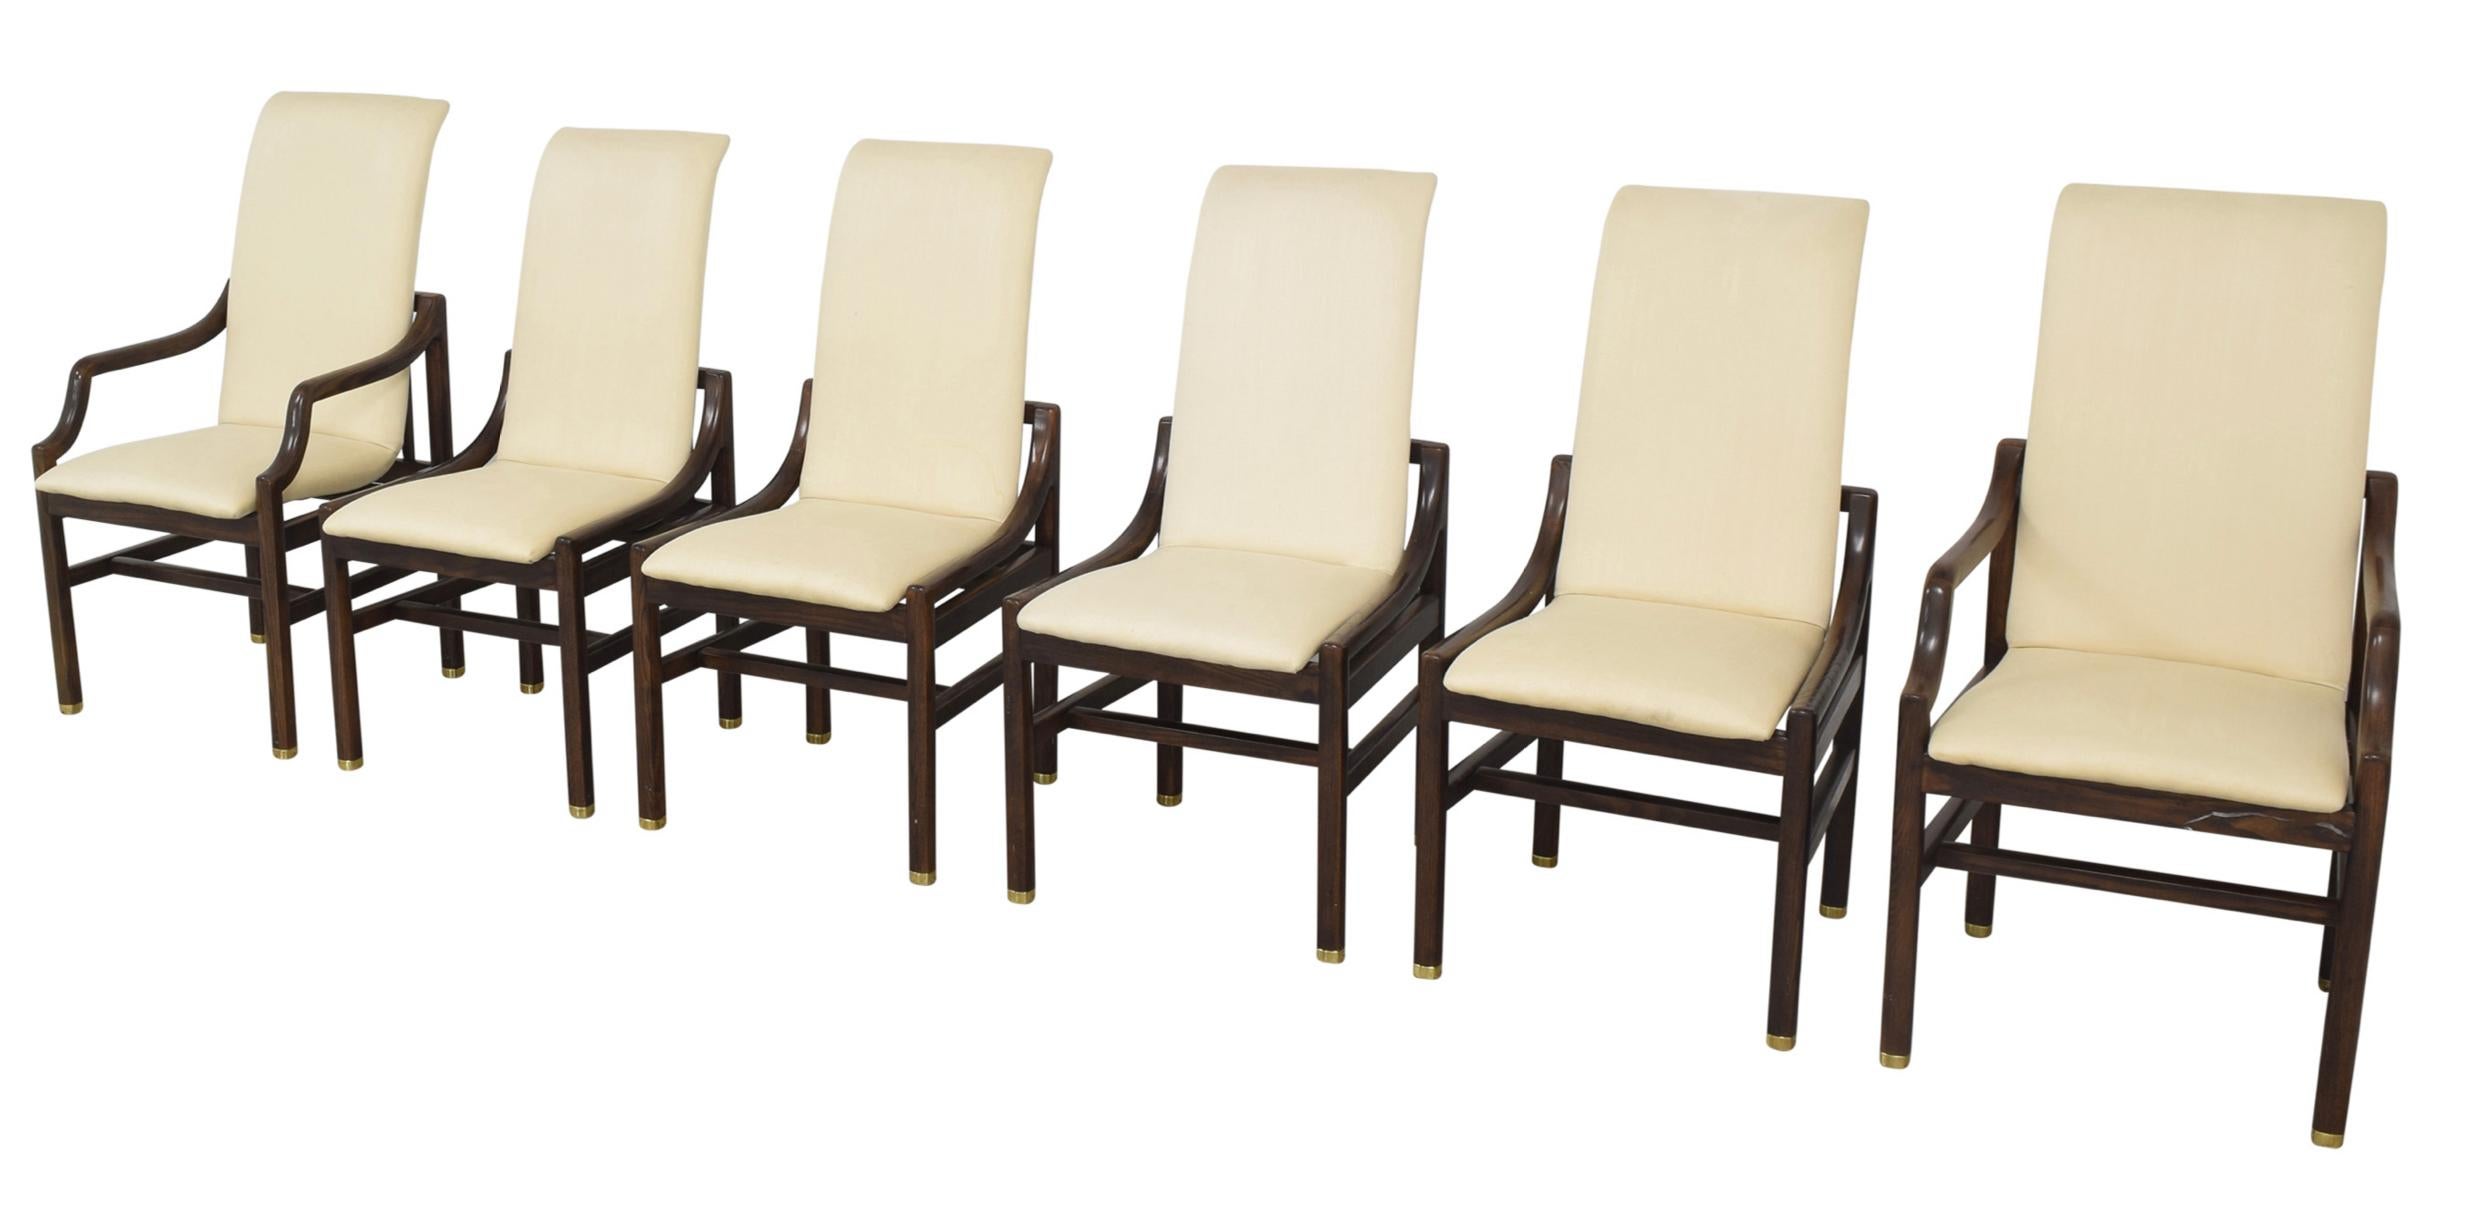 Vintage sculptural Henredon dining chair set of 6, walnut java base, brass accents. Gorgeous, timeless seating. Includes 2 captains (arm) chairs and 4 side chairs.
Armchairs: 22